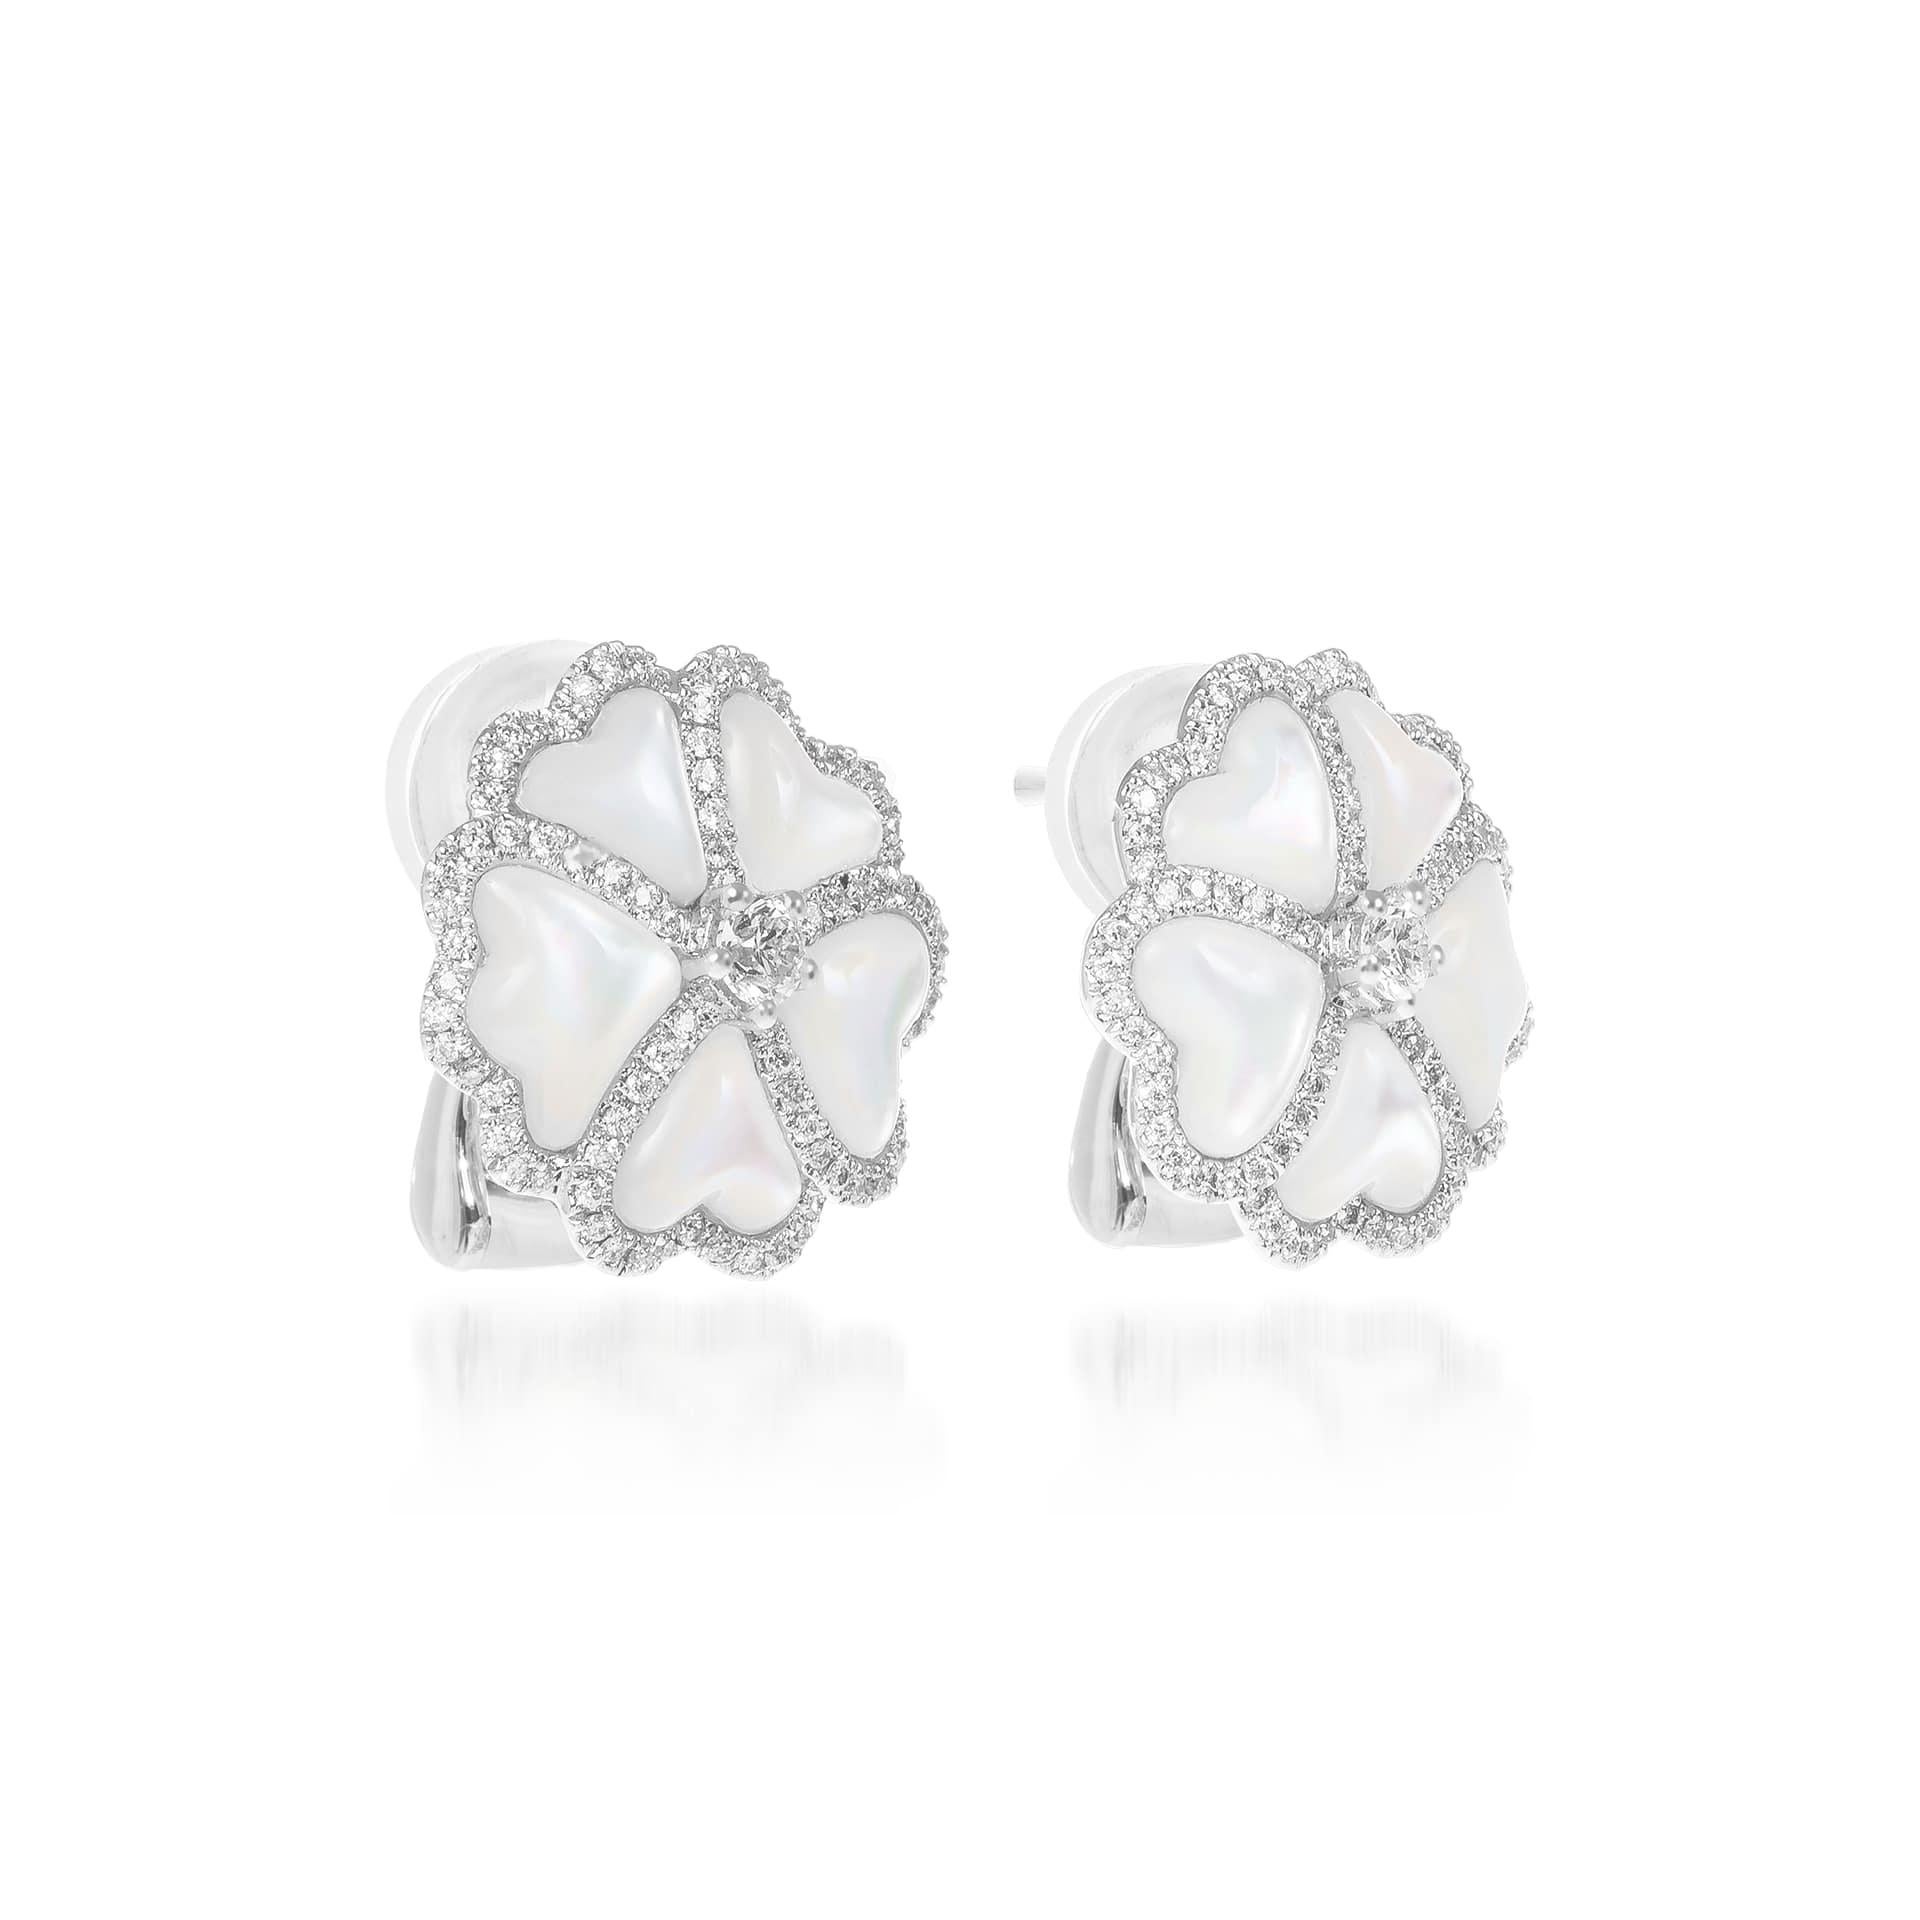 Bloom Diamond and White Mother-of-Pearl Flower Stud Earrings in 18K White Gold

Inspired by the exquisite petals of the alpine cinquefoil flower, the Bloom collection combines the richness of diamonds and precious metals with the light versatility